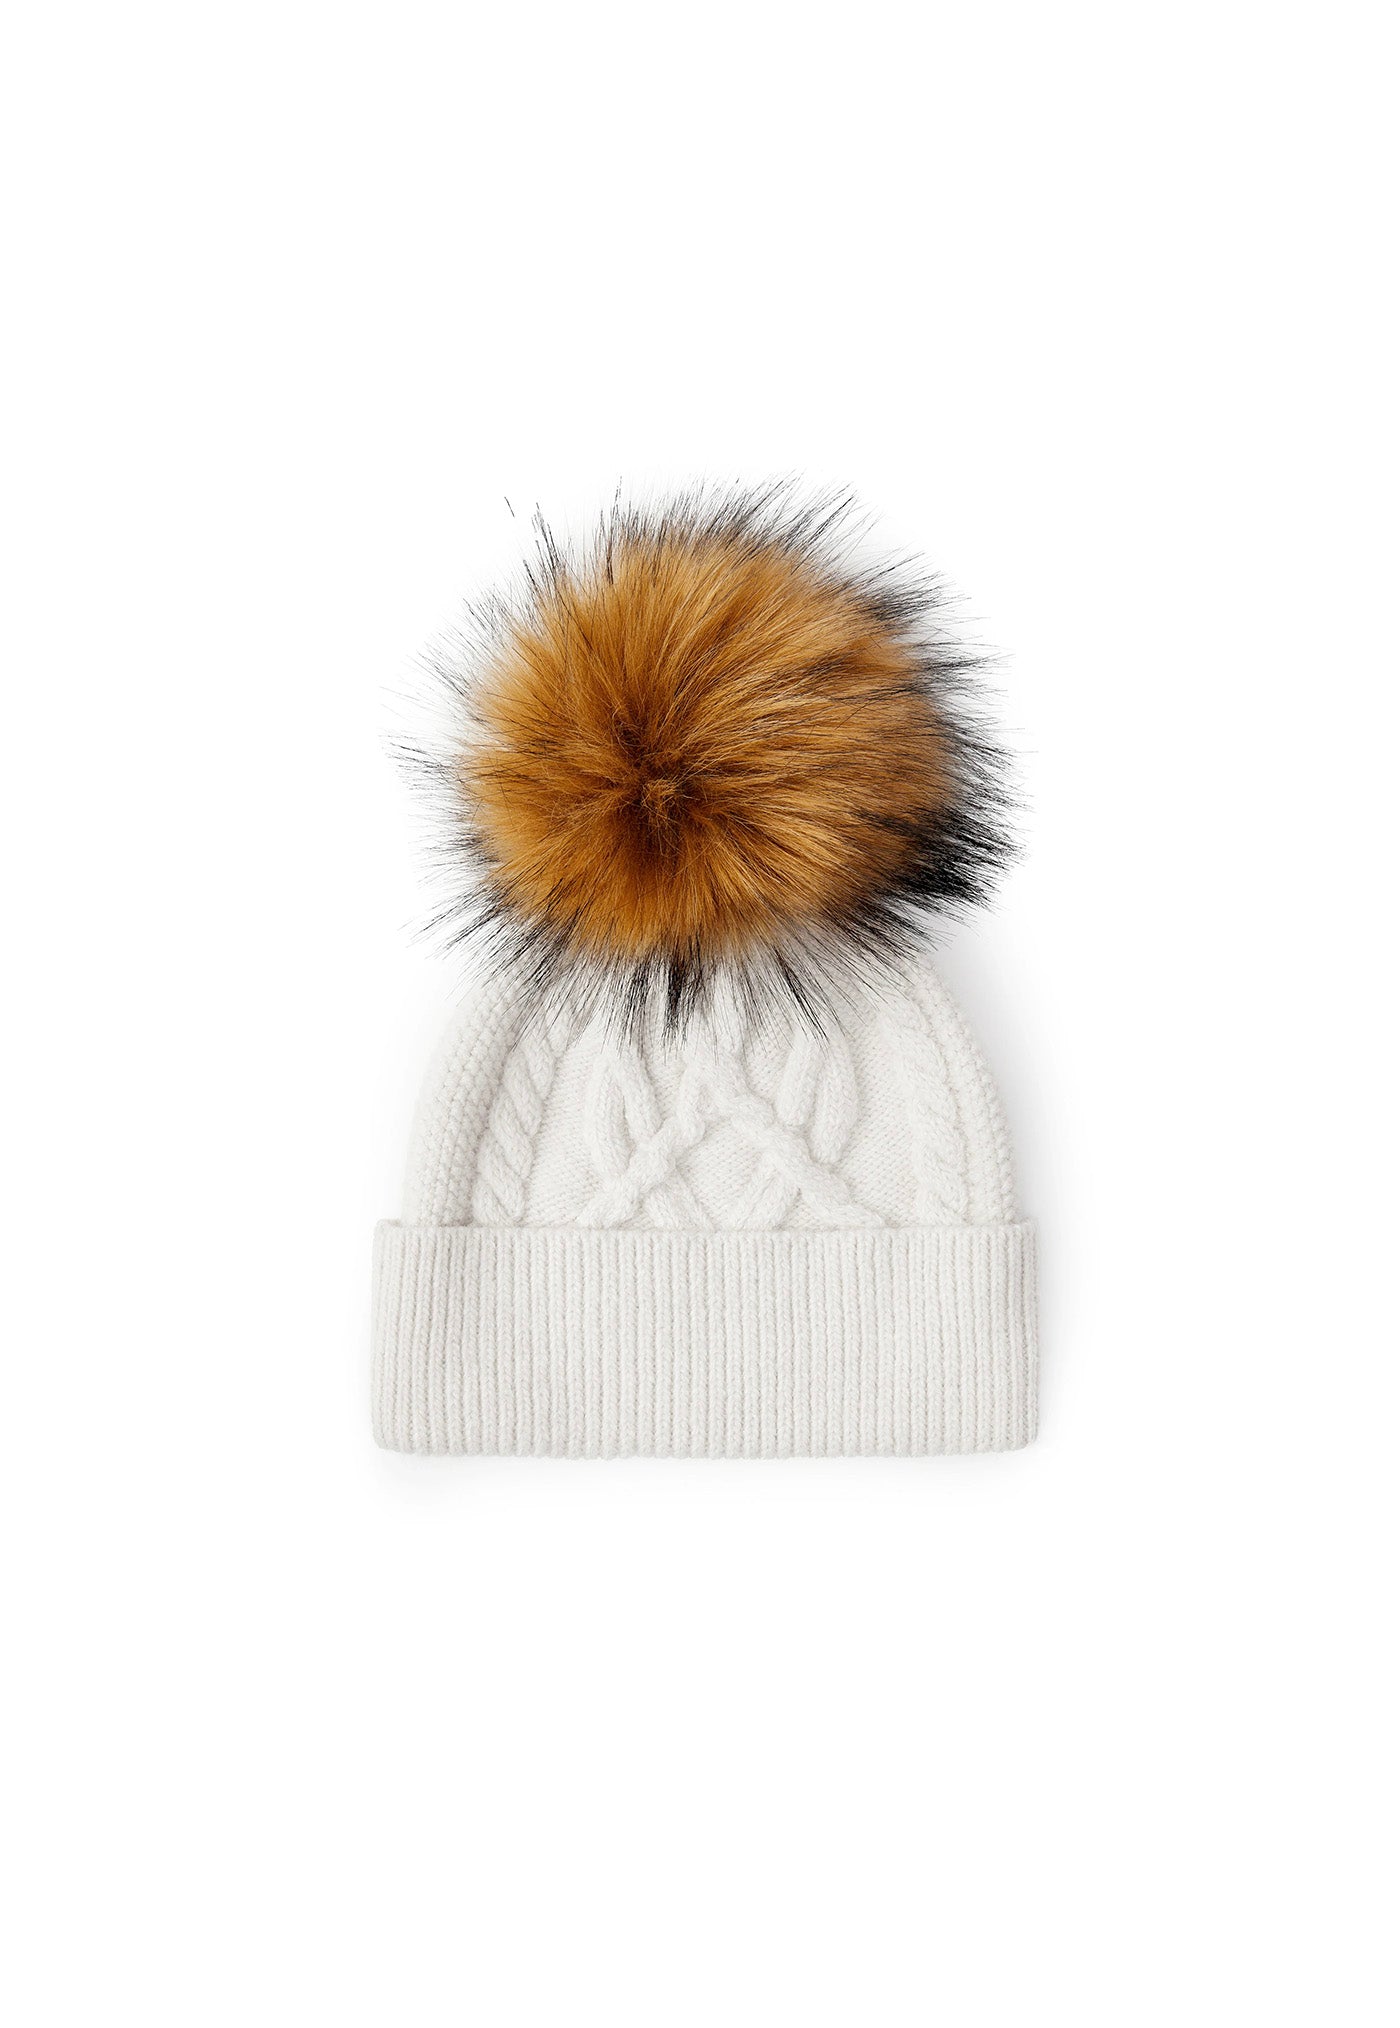 Cortina Bobble Hat - Oatmeal sold by Angel Divine